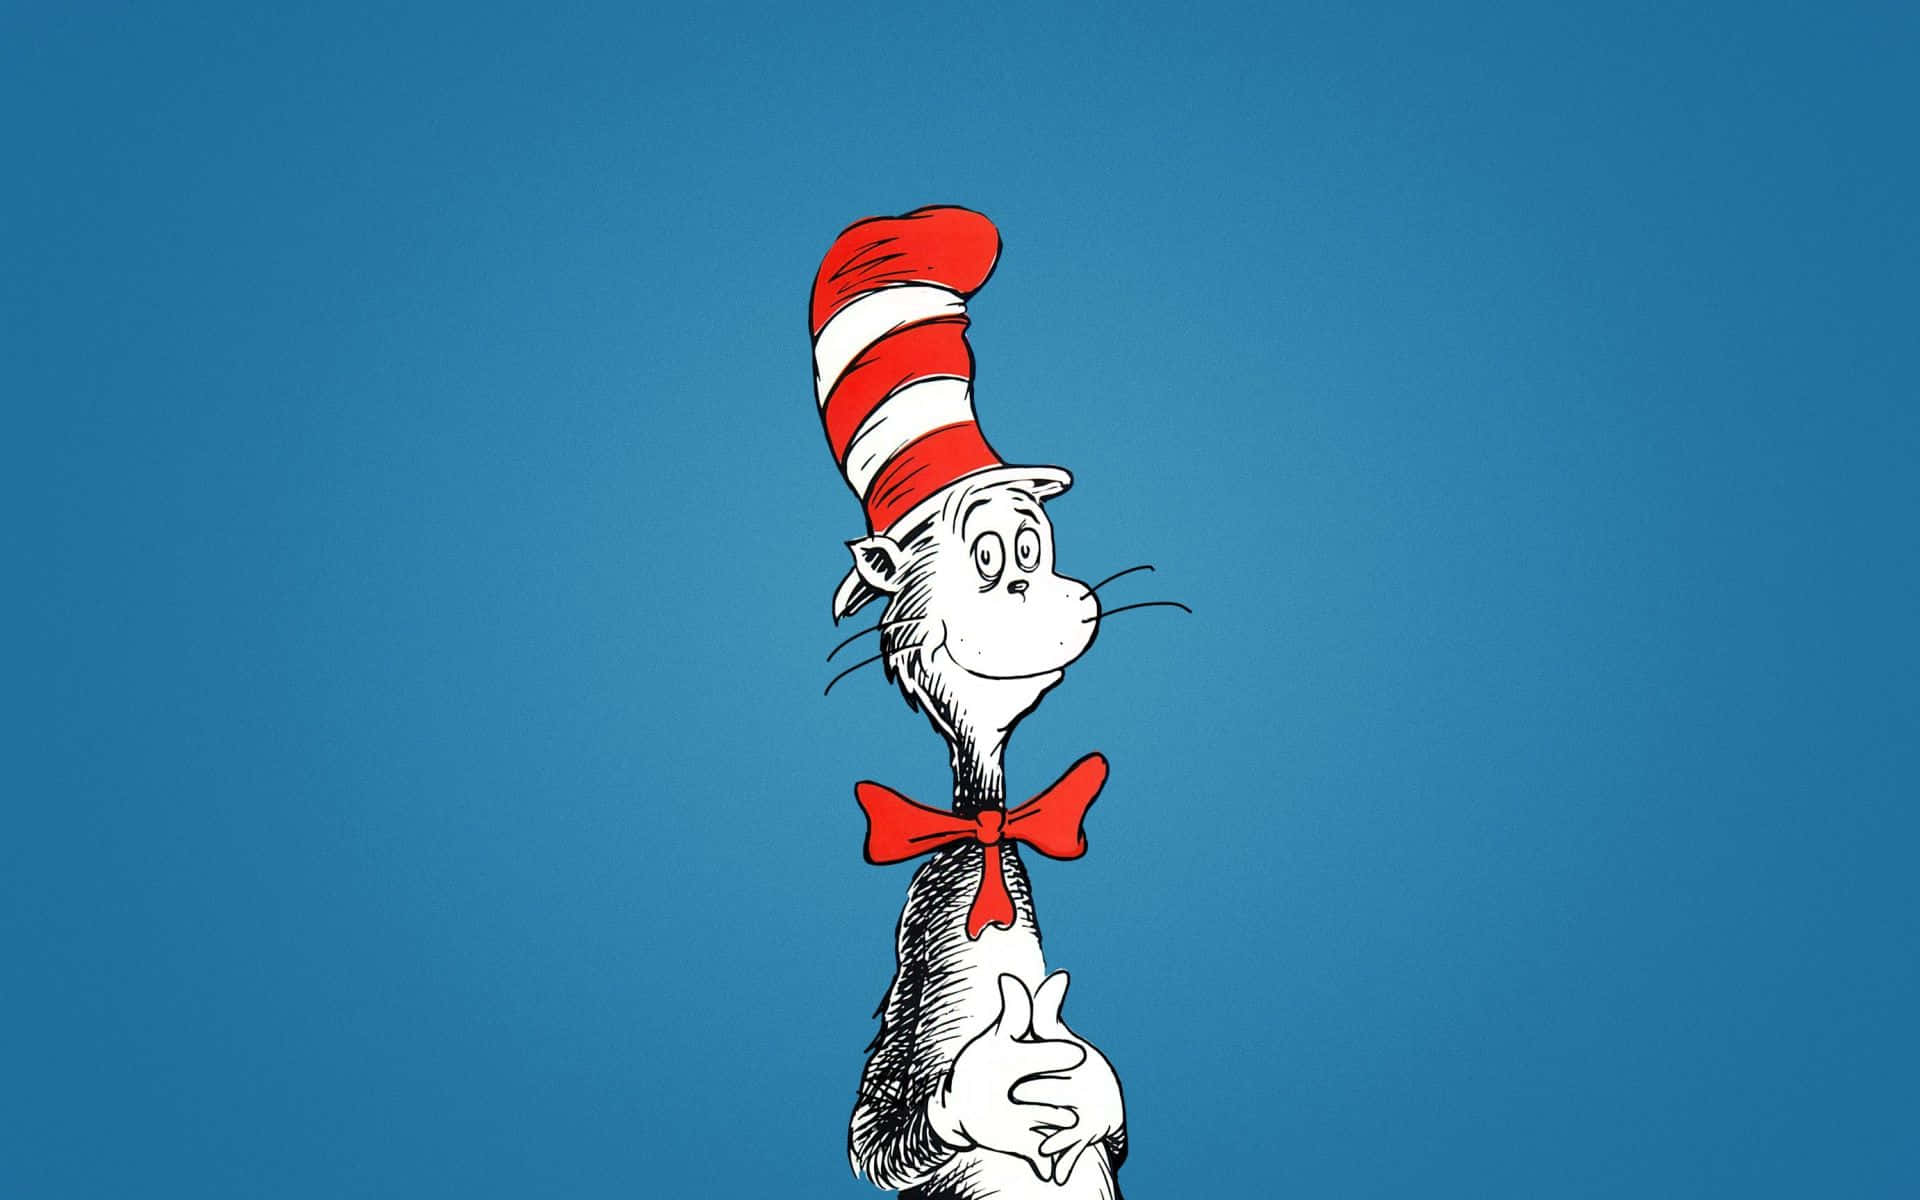 The Cat In The Hat By Dr. Seuss Cover Art Wallpaper